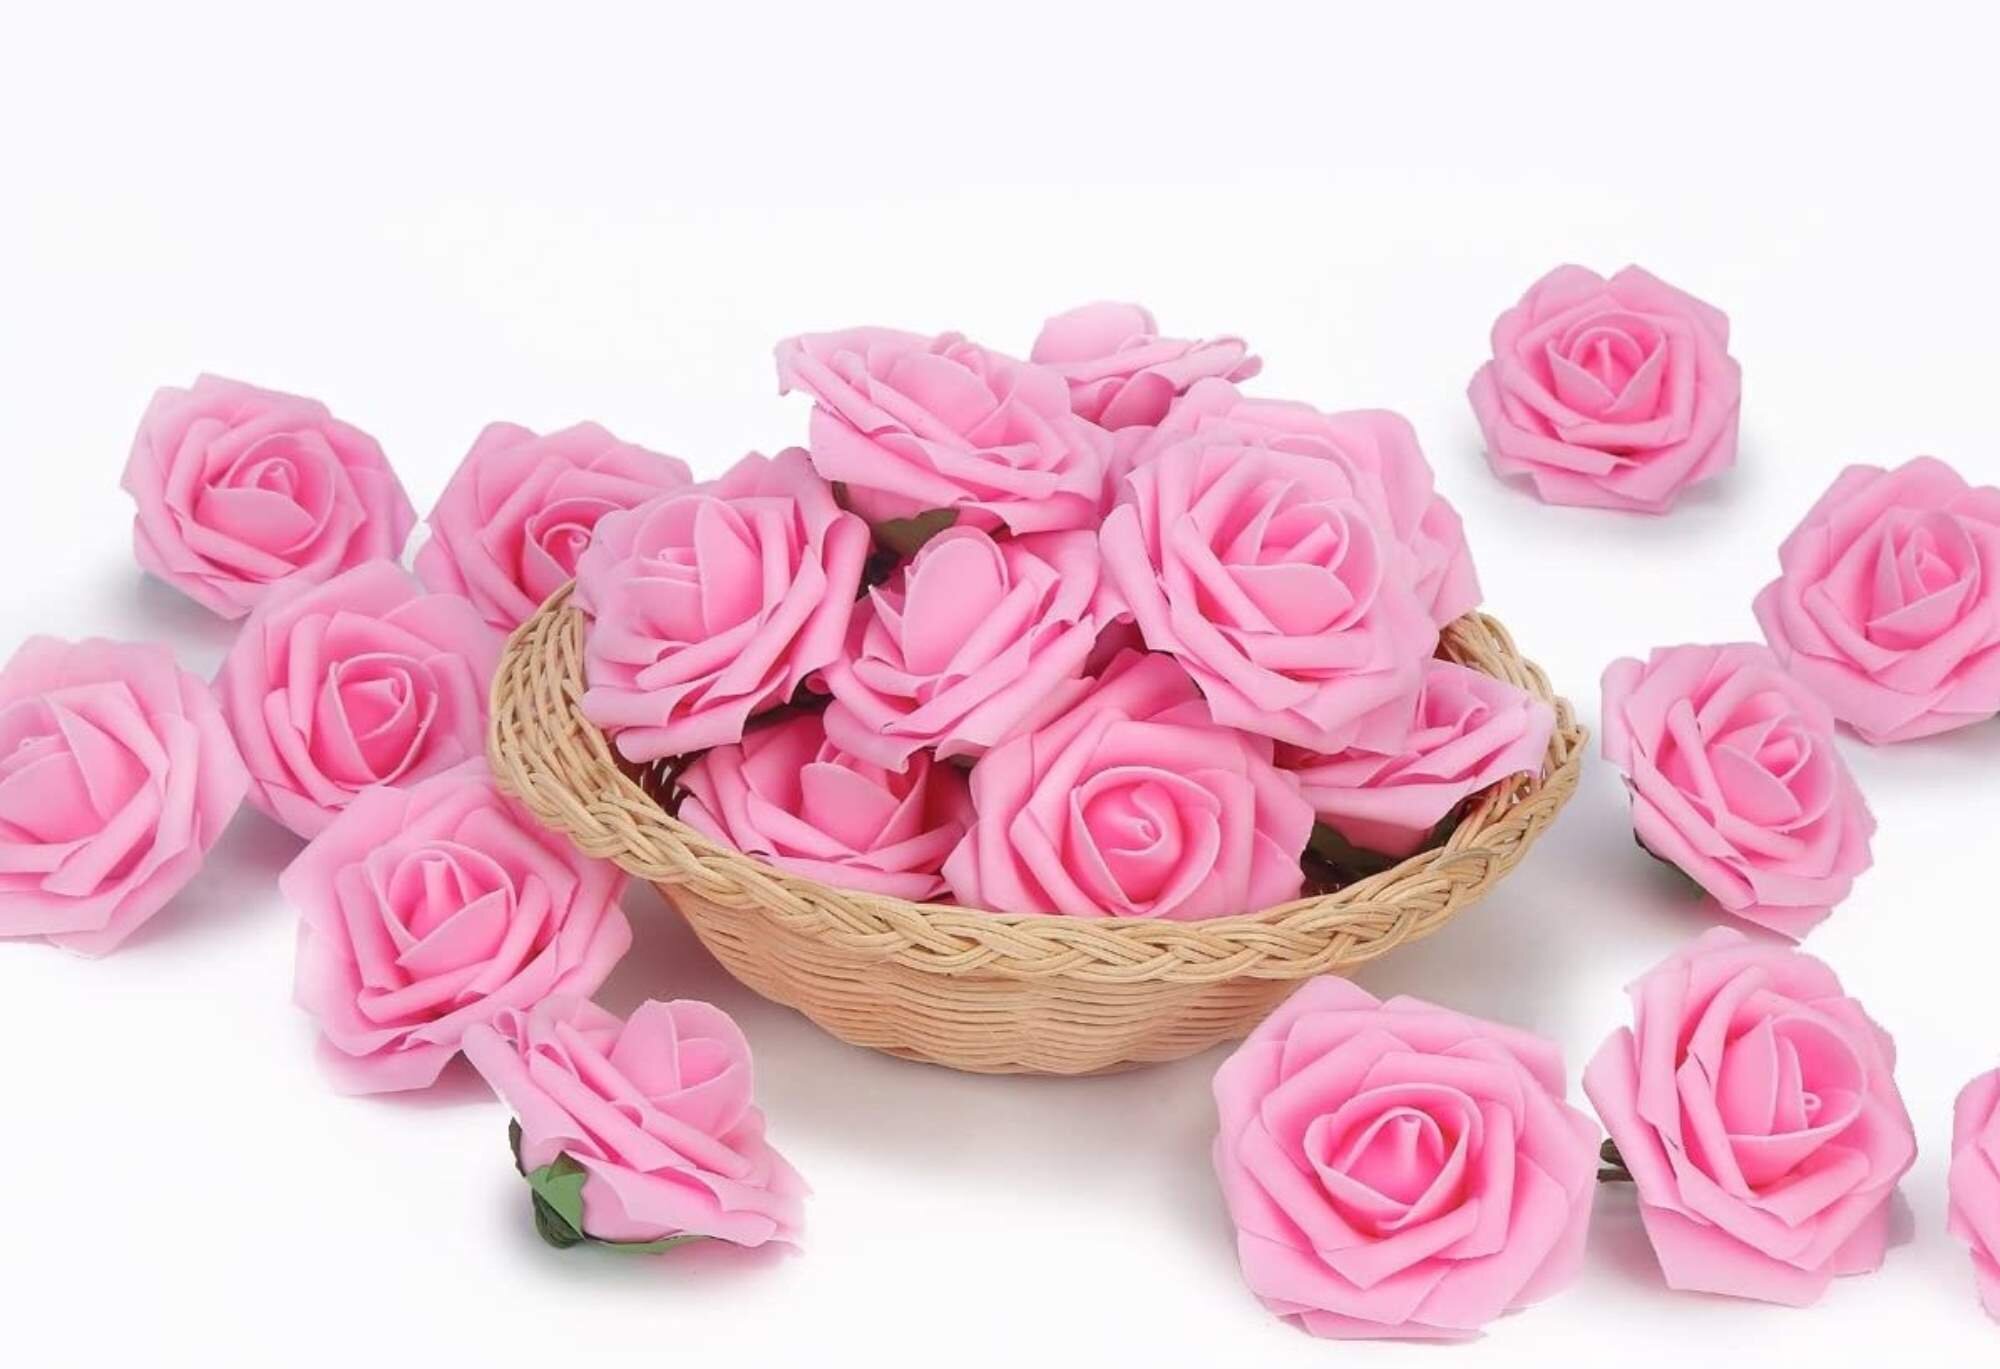 Home decoration fake flowers Fake Flower Artificial Potted Flowers Simulation Rose Silk Bouquet Flower Set Potted Plants Flower Ornaments Table Home Wedding Decoration Artificial Flowers Color : Whit 